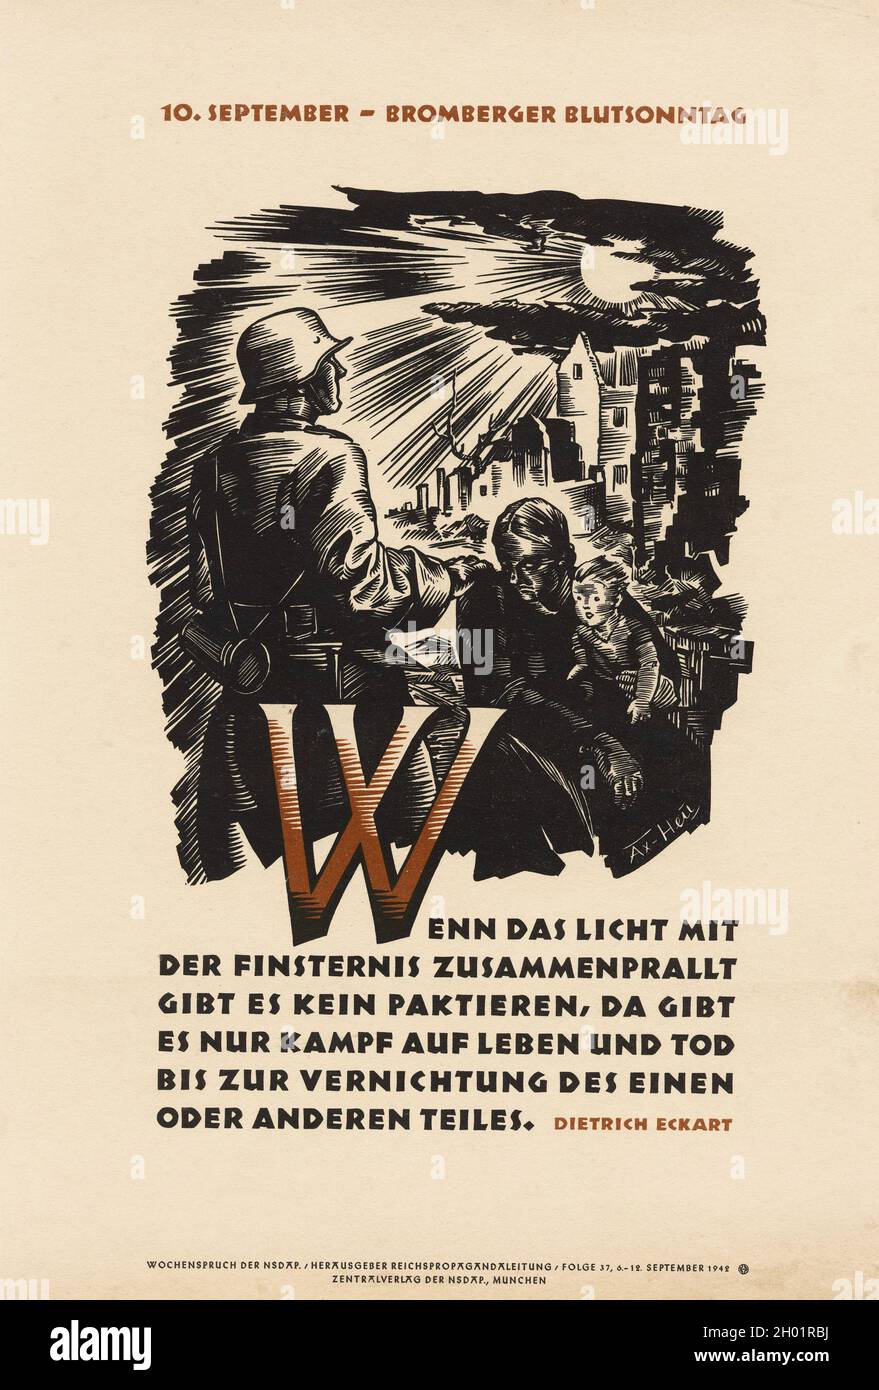 A Nazi poster justifying the massacre of civilians in Bromberg on the 3rd and 4th September 1939, known as Bloody Sunday. The text reads If the light clashes with darkness there is no making of agreements, there is only a fight of life and death until the one or the other part is destroyed.is only a fight of life and death until the one or the other part is destroyed. Stock Photo